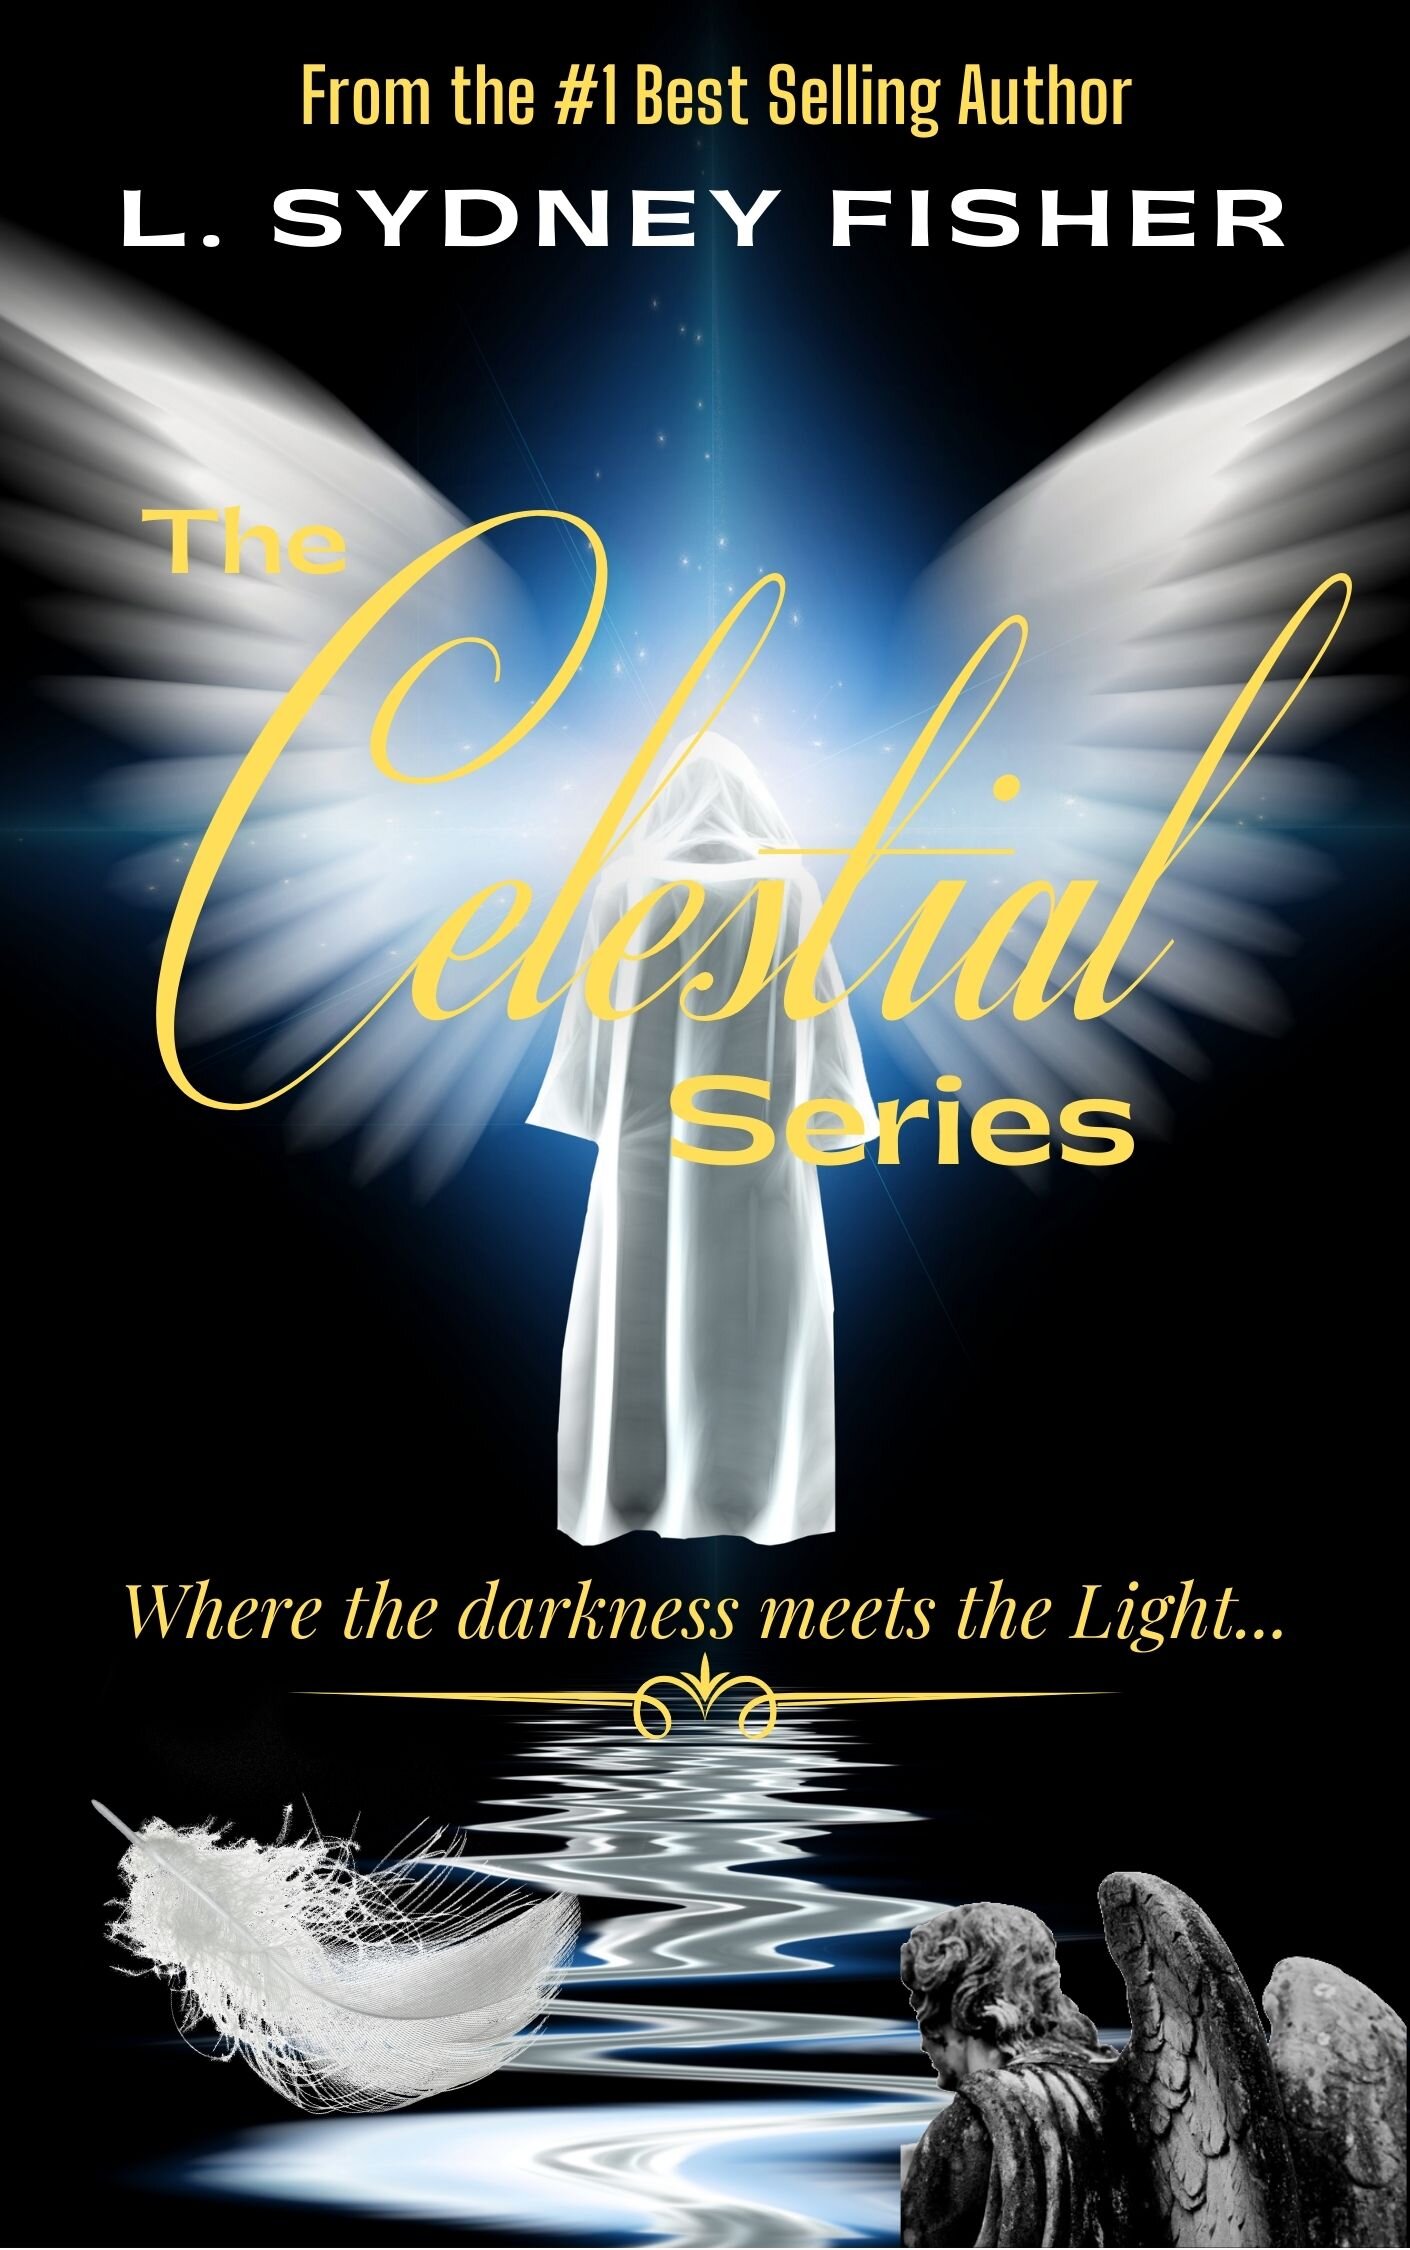 The Celestial Series Kindle Cover Update 2021 (1).jpg